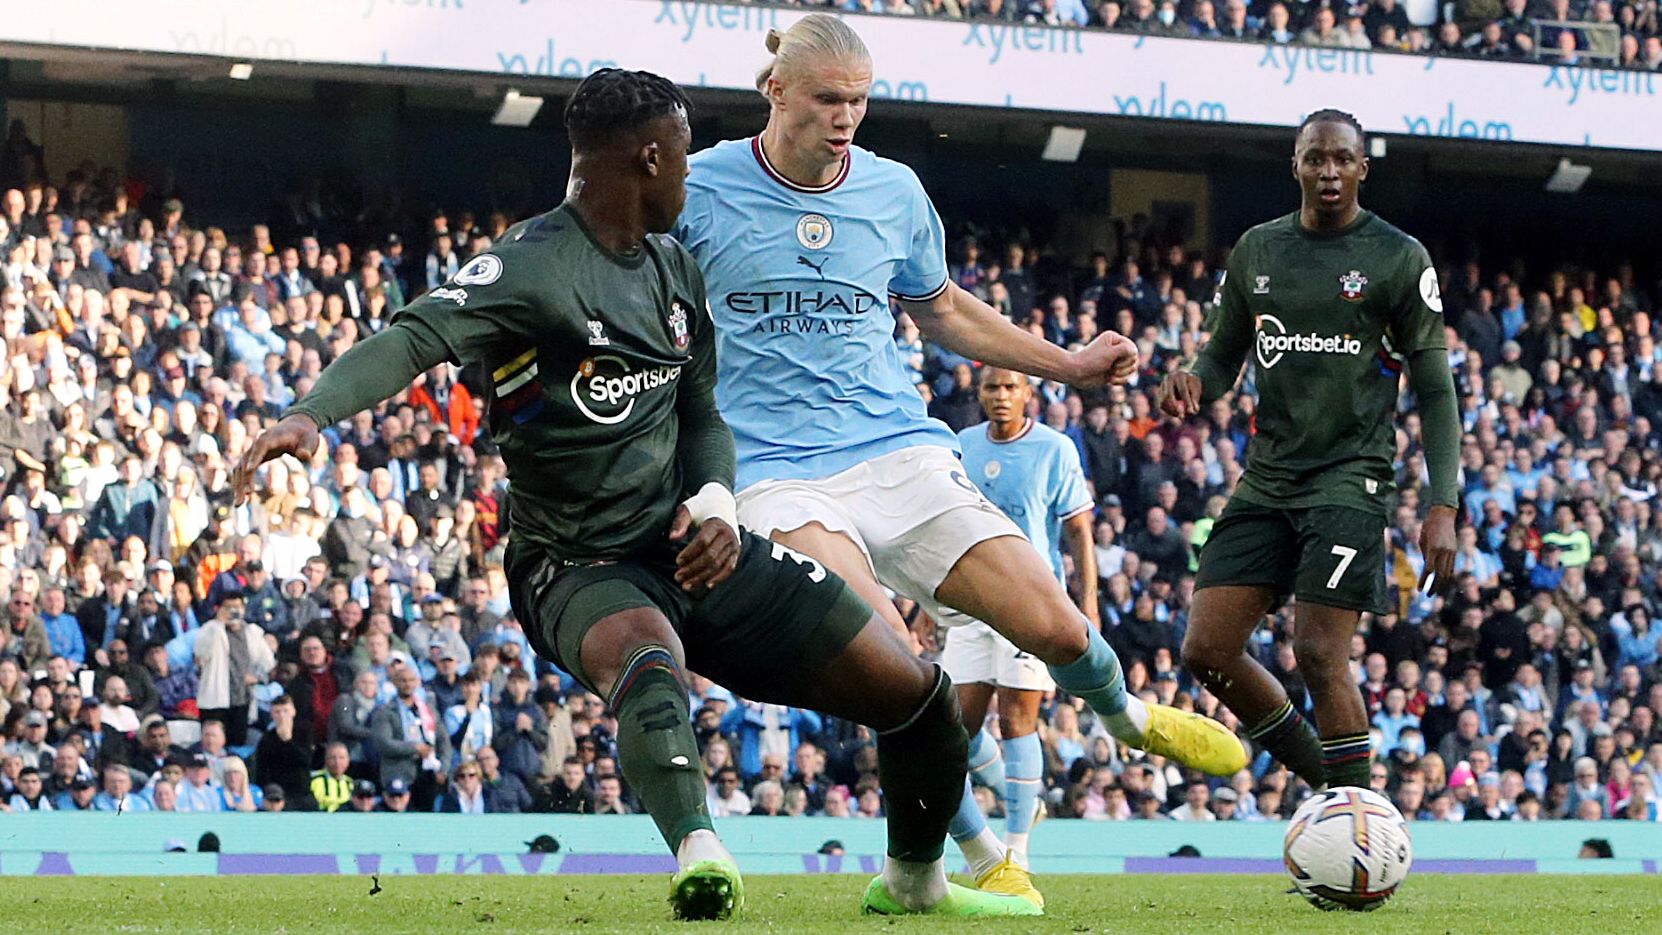 Manchester City's Erling Haland scored his side's fourth goal against Southampton.